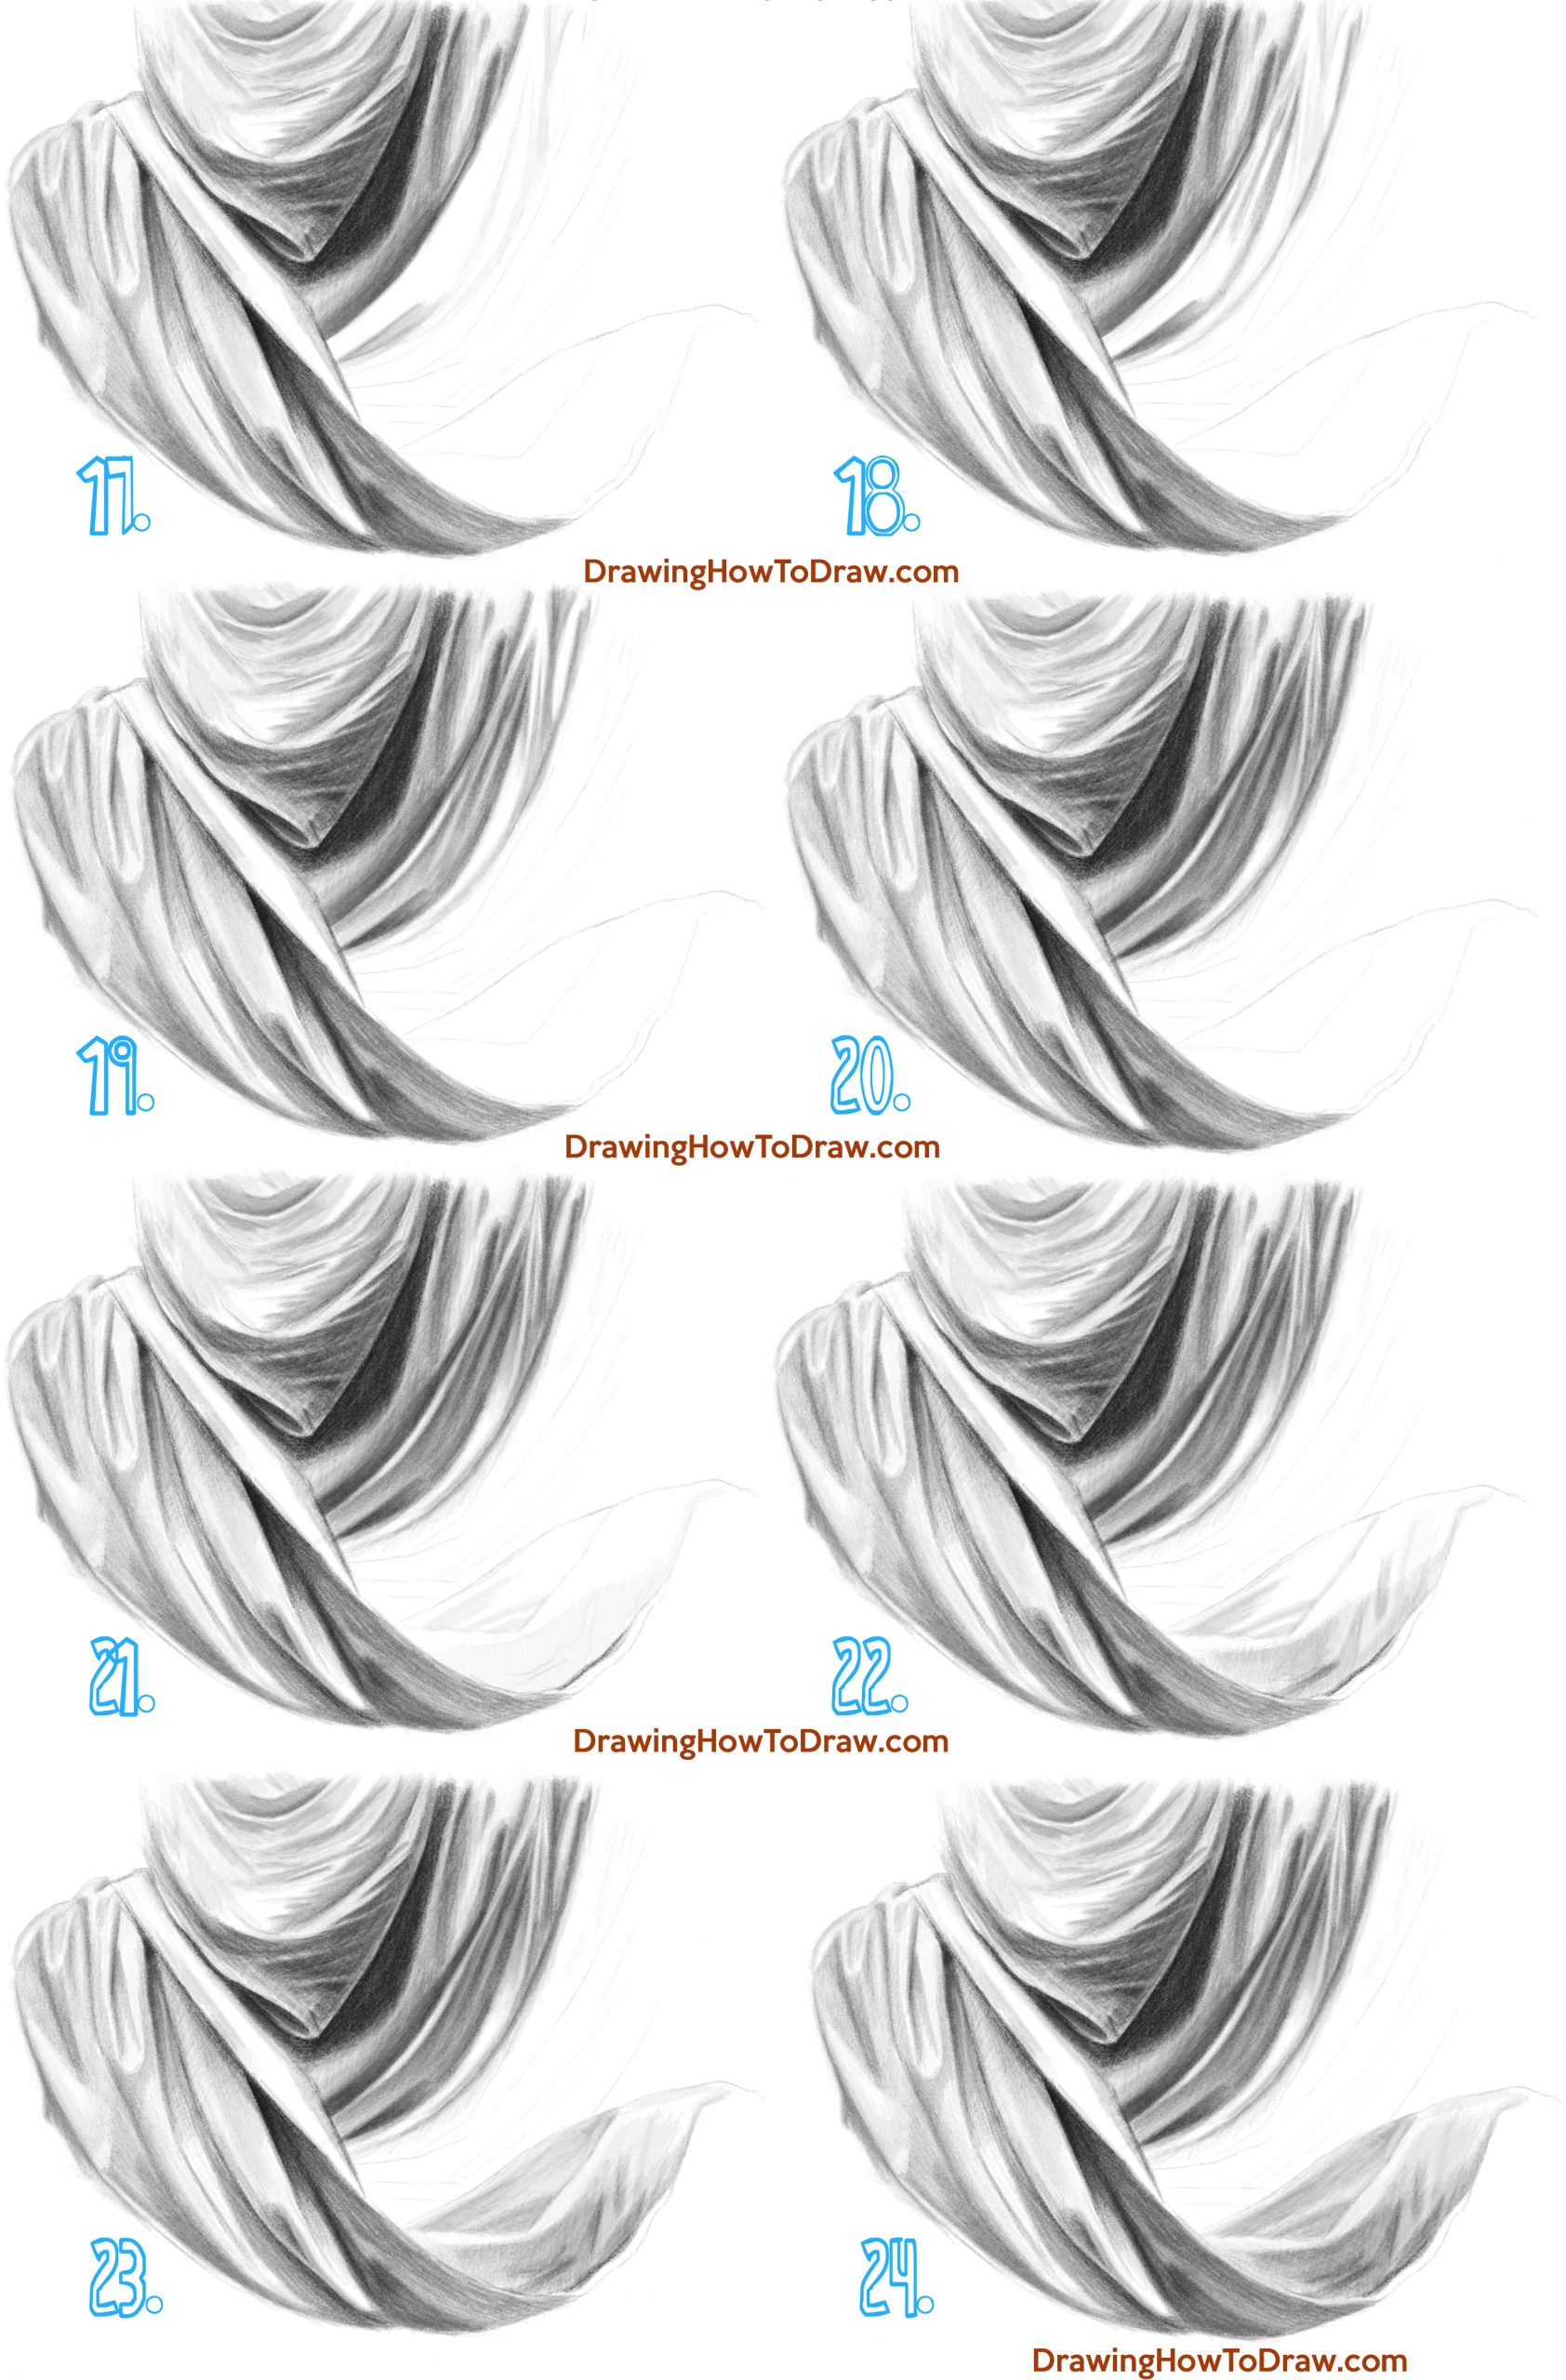 How to Draw Draped Fabric with Creased Folds, Wrinkles on Clothing Fabric and Drapery step by step drawing tutorial easy